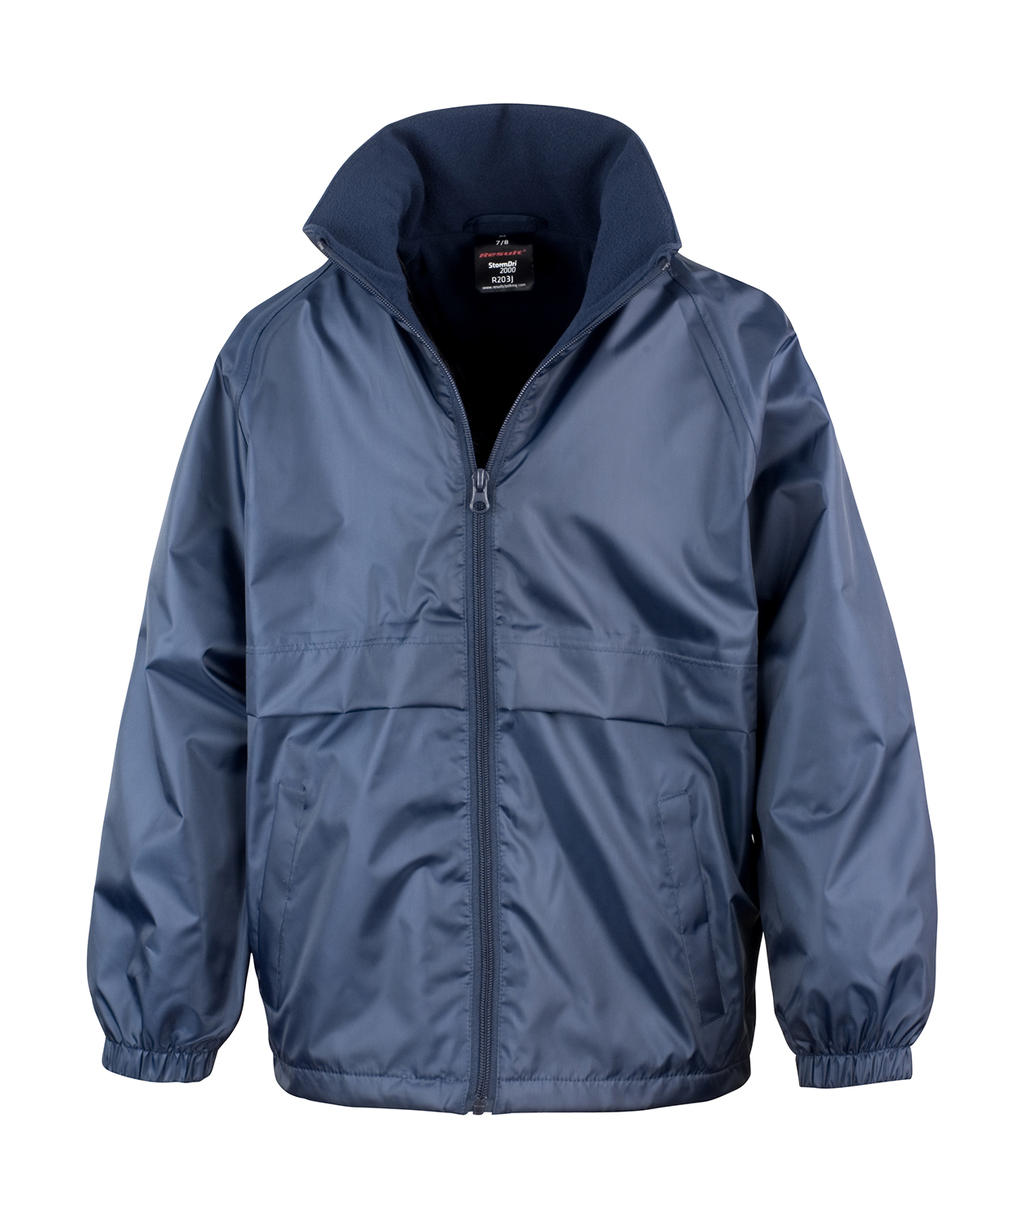  CORE Junior Microfleece Lined Jacket in Farbe Navy